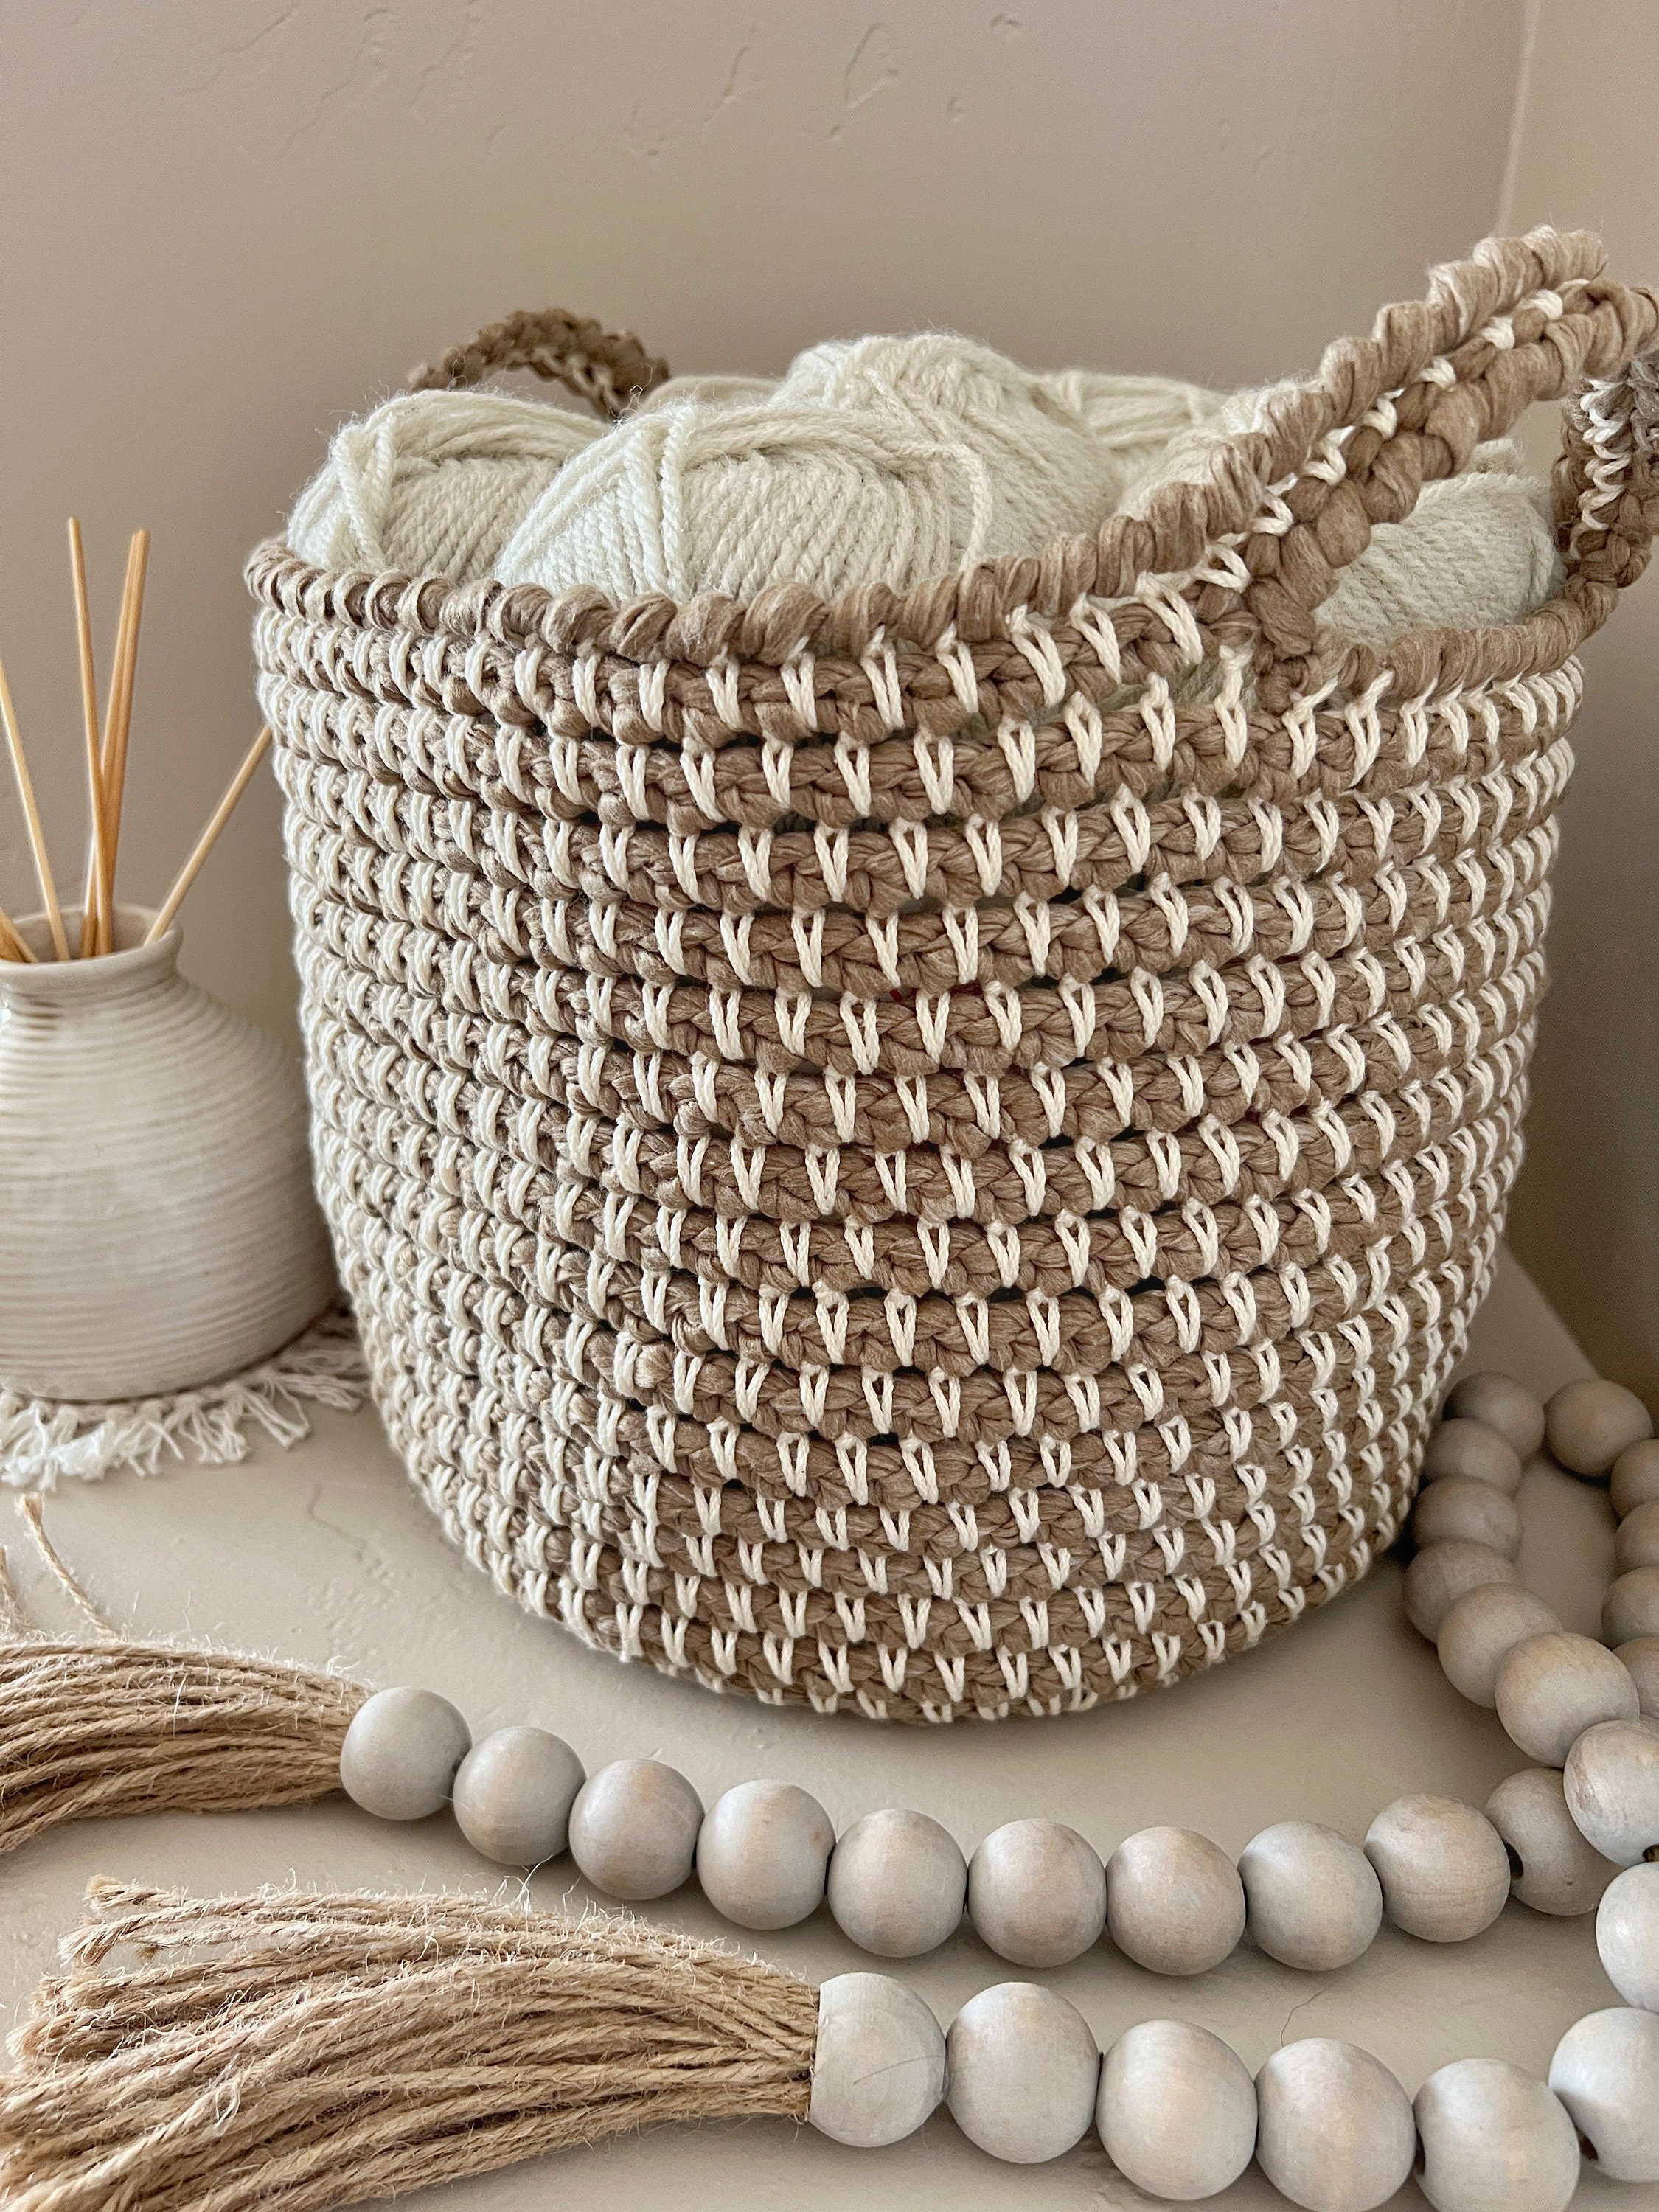 Rope Basket Crochet Pattern With Handles, Willow Pond Basket, Digital  Download, 10-12 Inch Planter Cover, Crochet Home Decor, Modern, Easy 